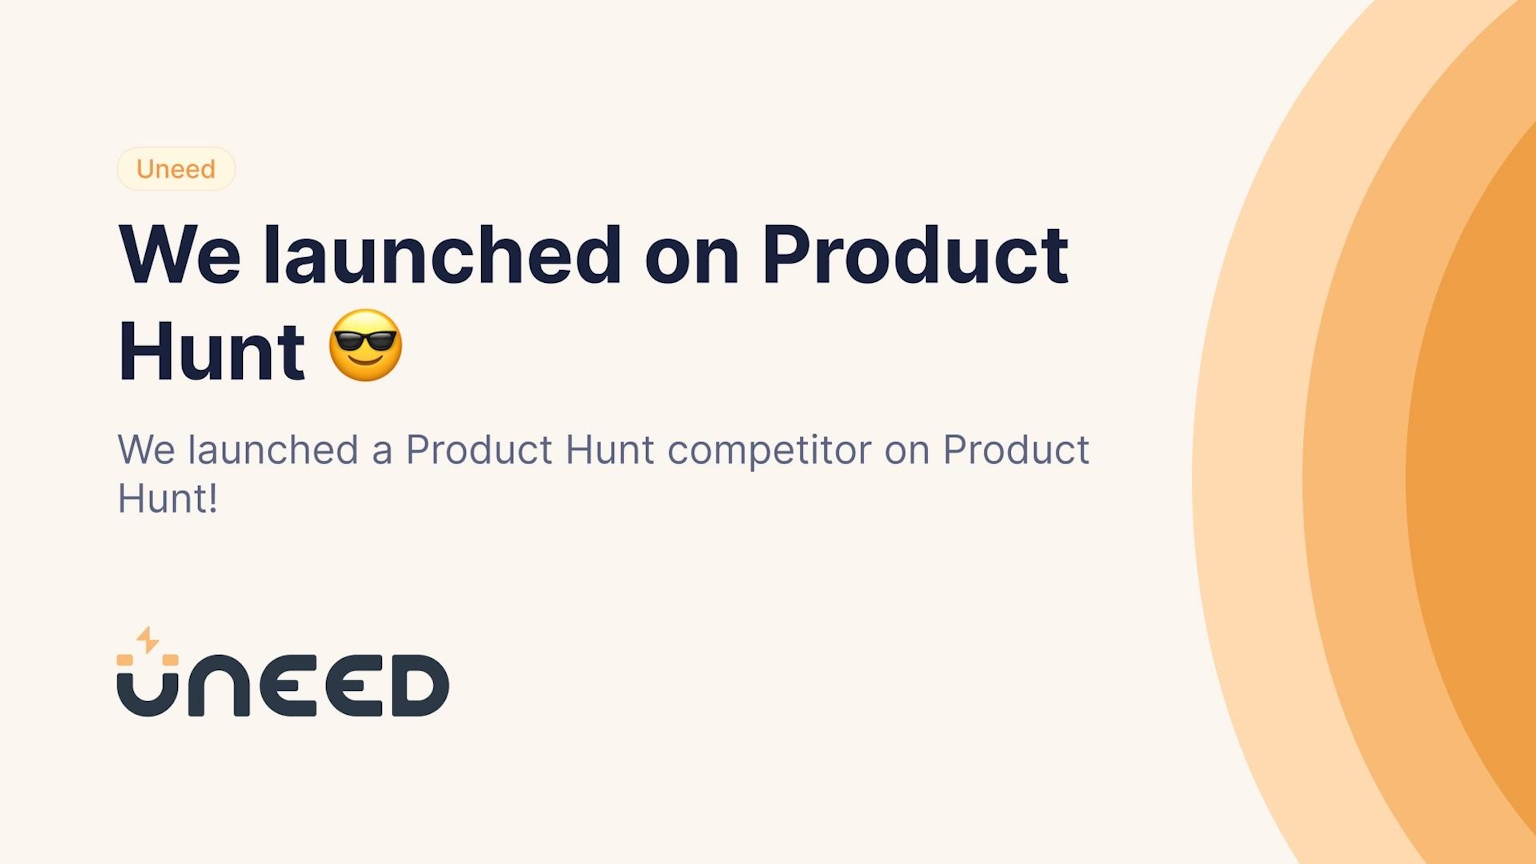 We launched on Product Hunt